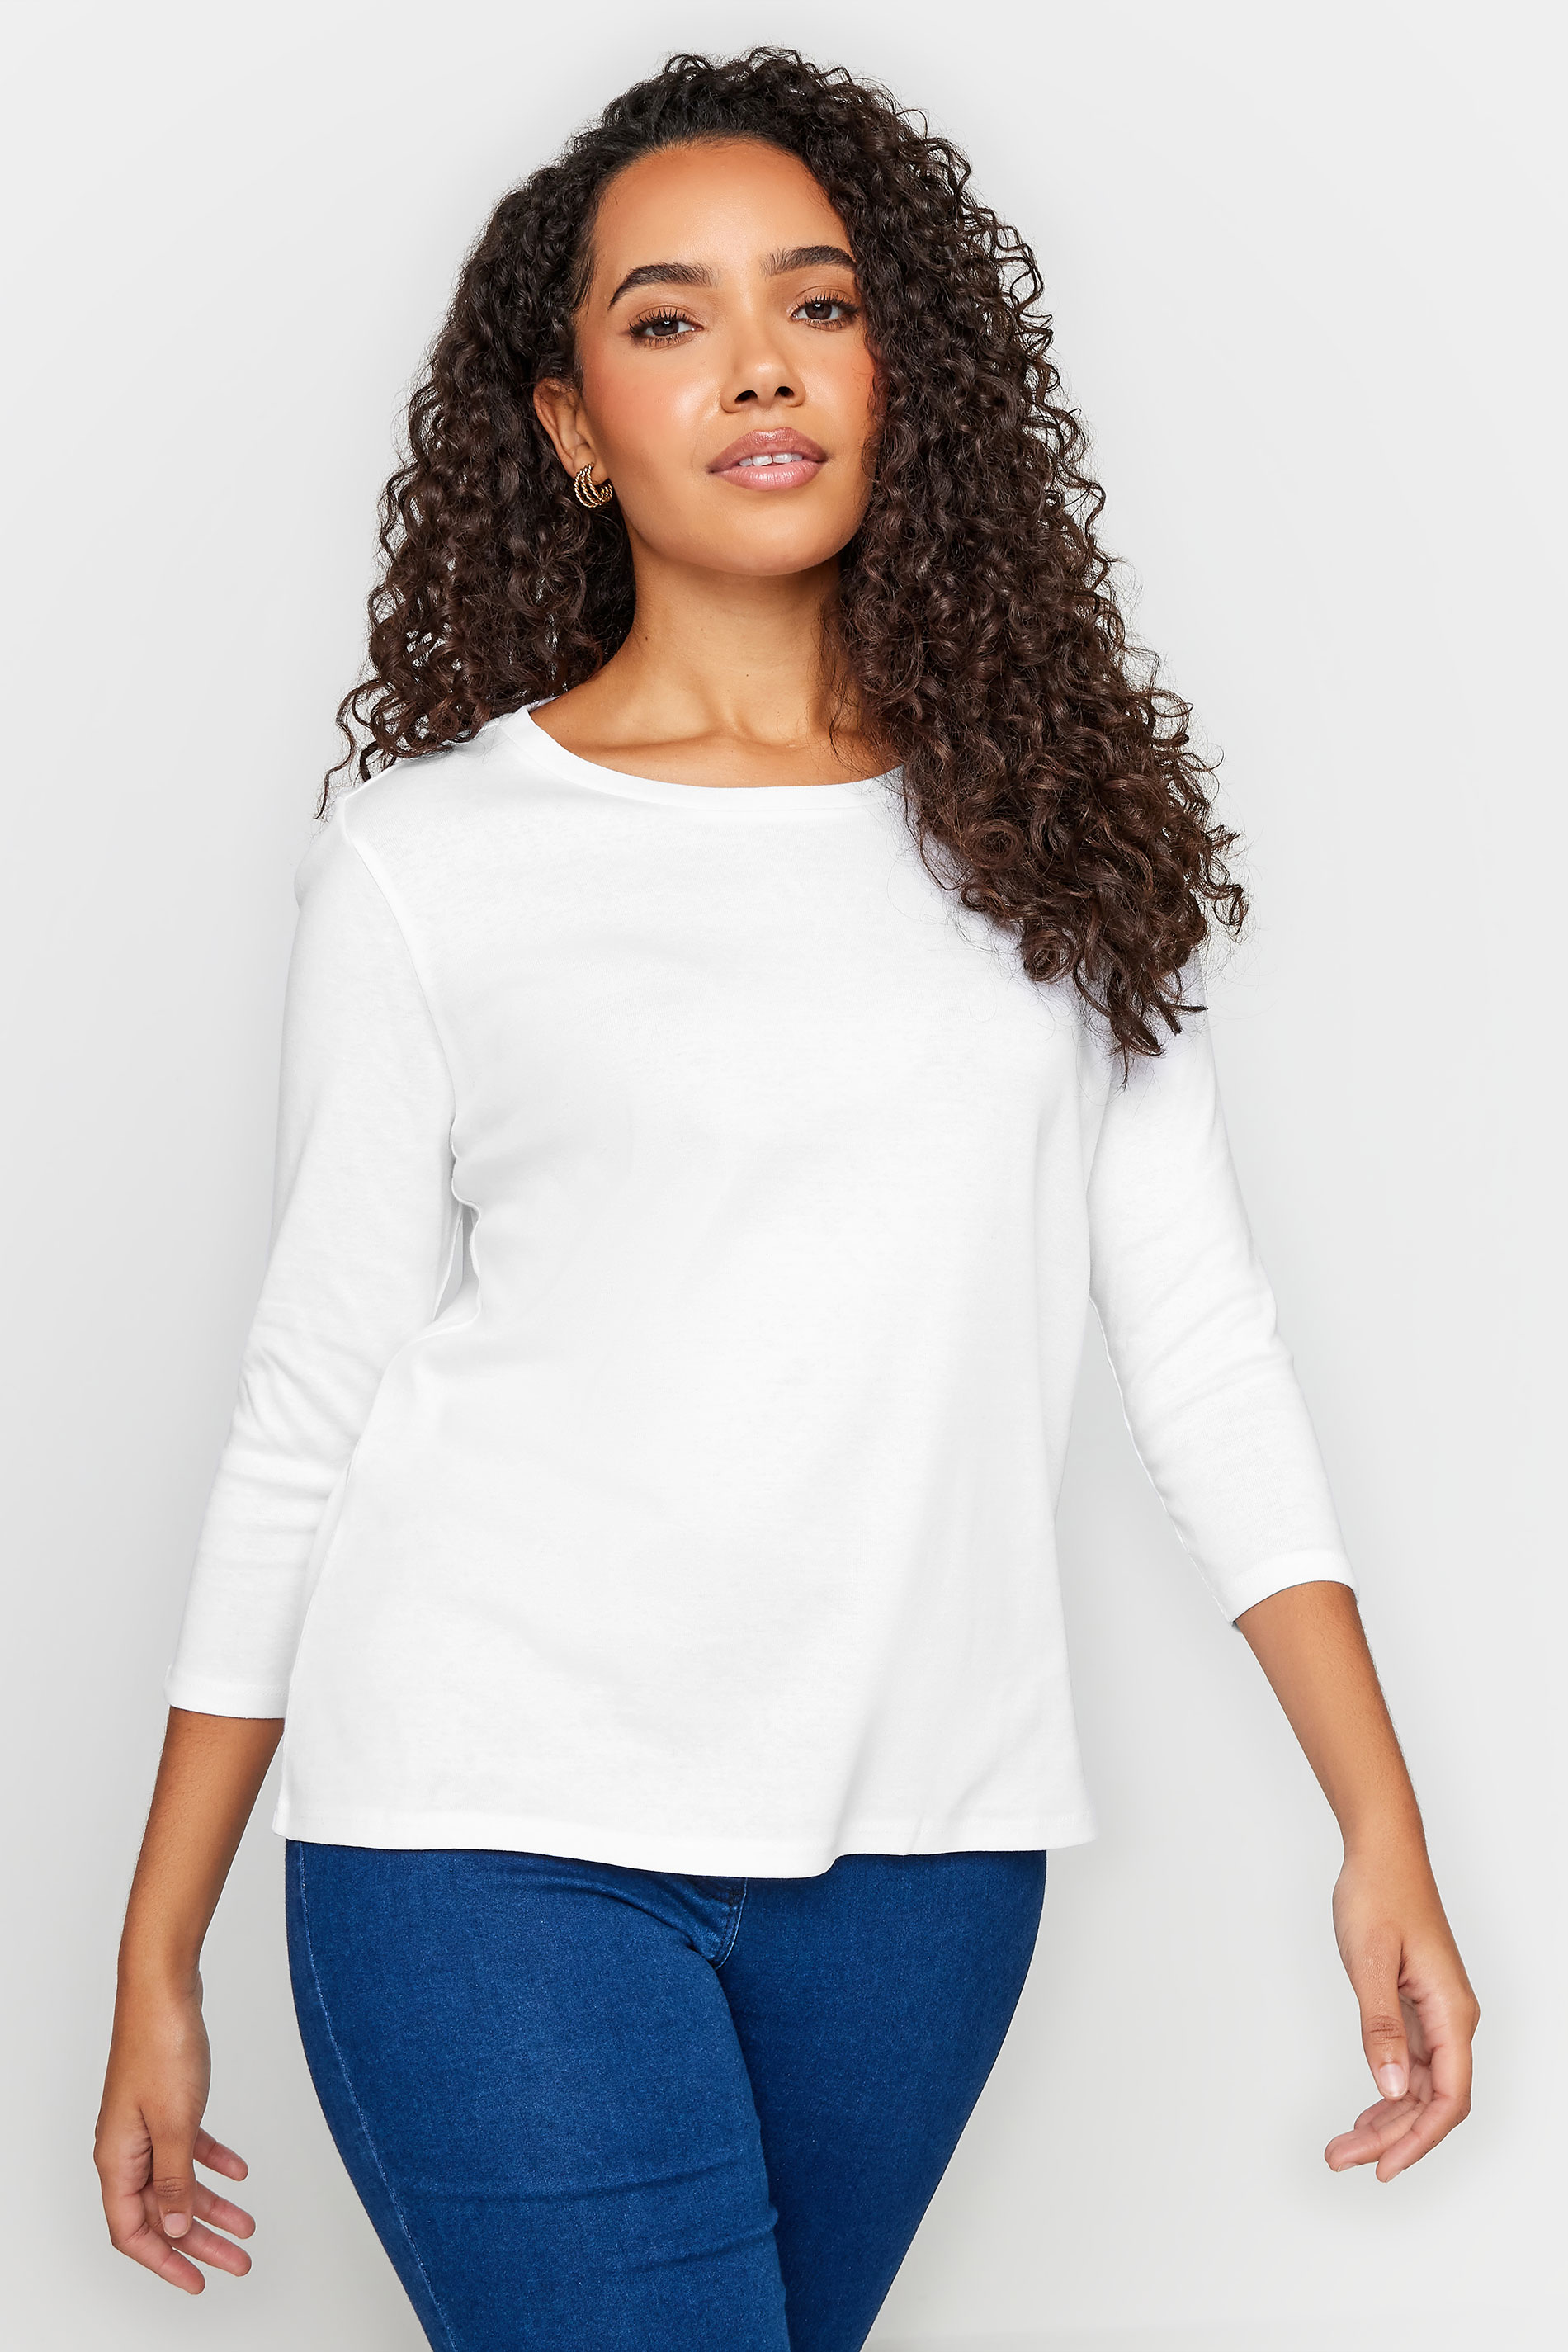 M&Co White 3/4 Sleeve Cotton Top | M&Co  1